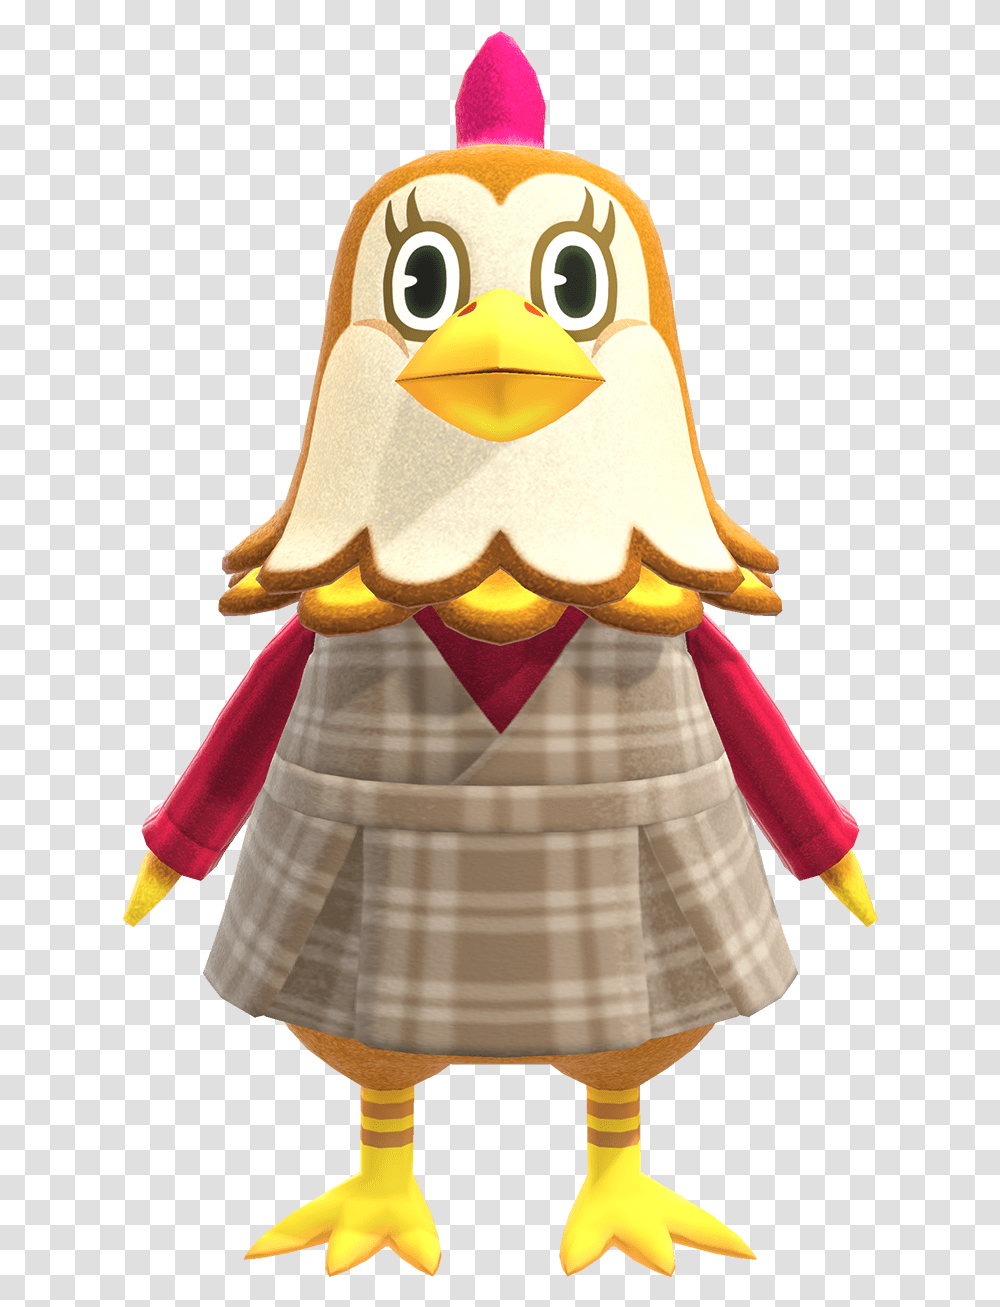 Ava Nookipedia The Animal Crossing Wiki Ava From Animal Crossing, Clothing, Apparel, Figurine, Person Transparent Png